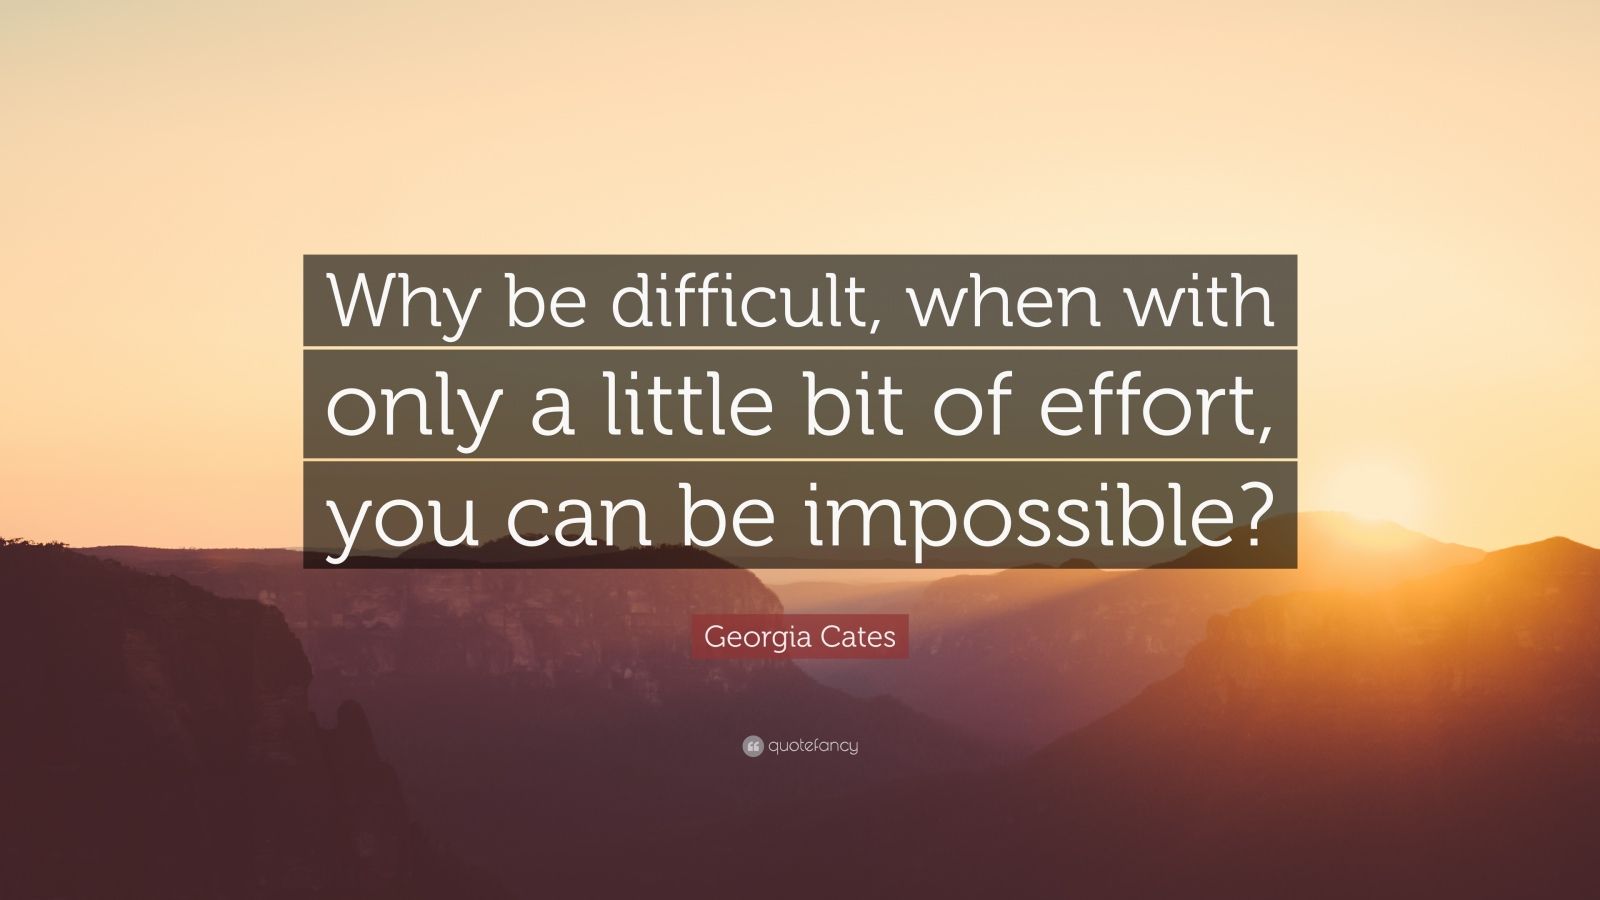 Georgia Cates Quote: “Why be difficult, when with only a little bit of ...